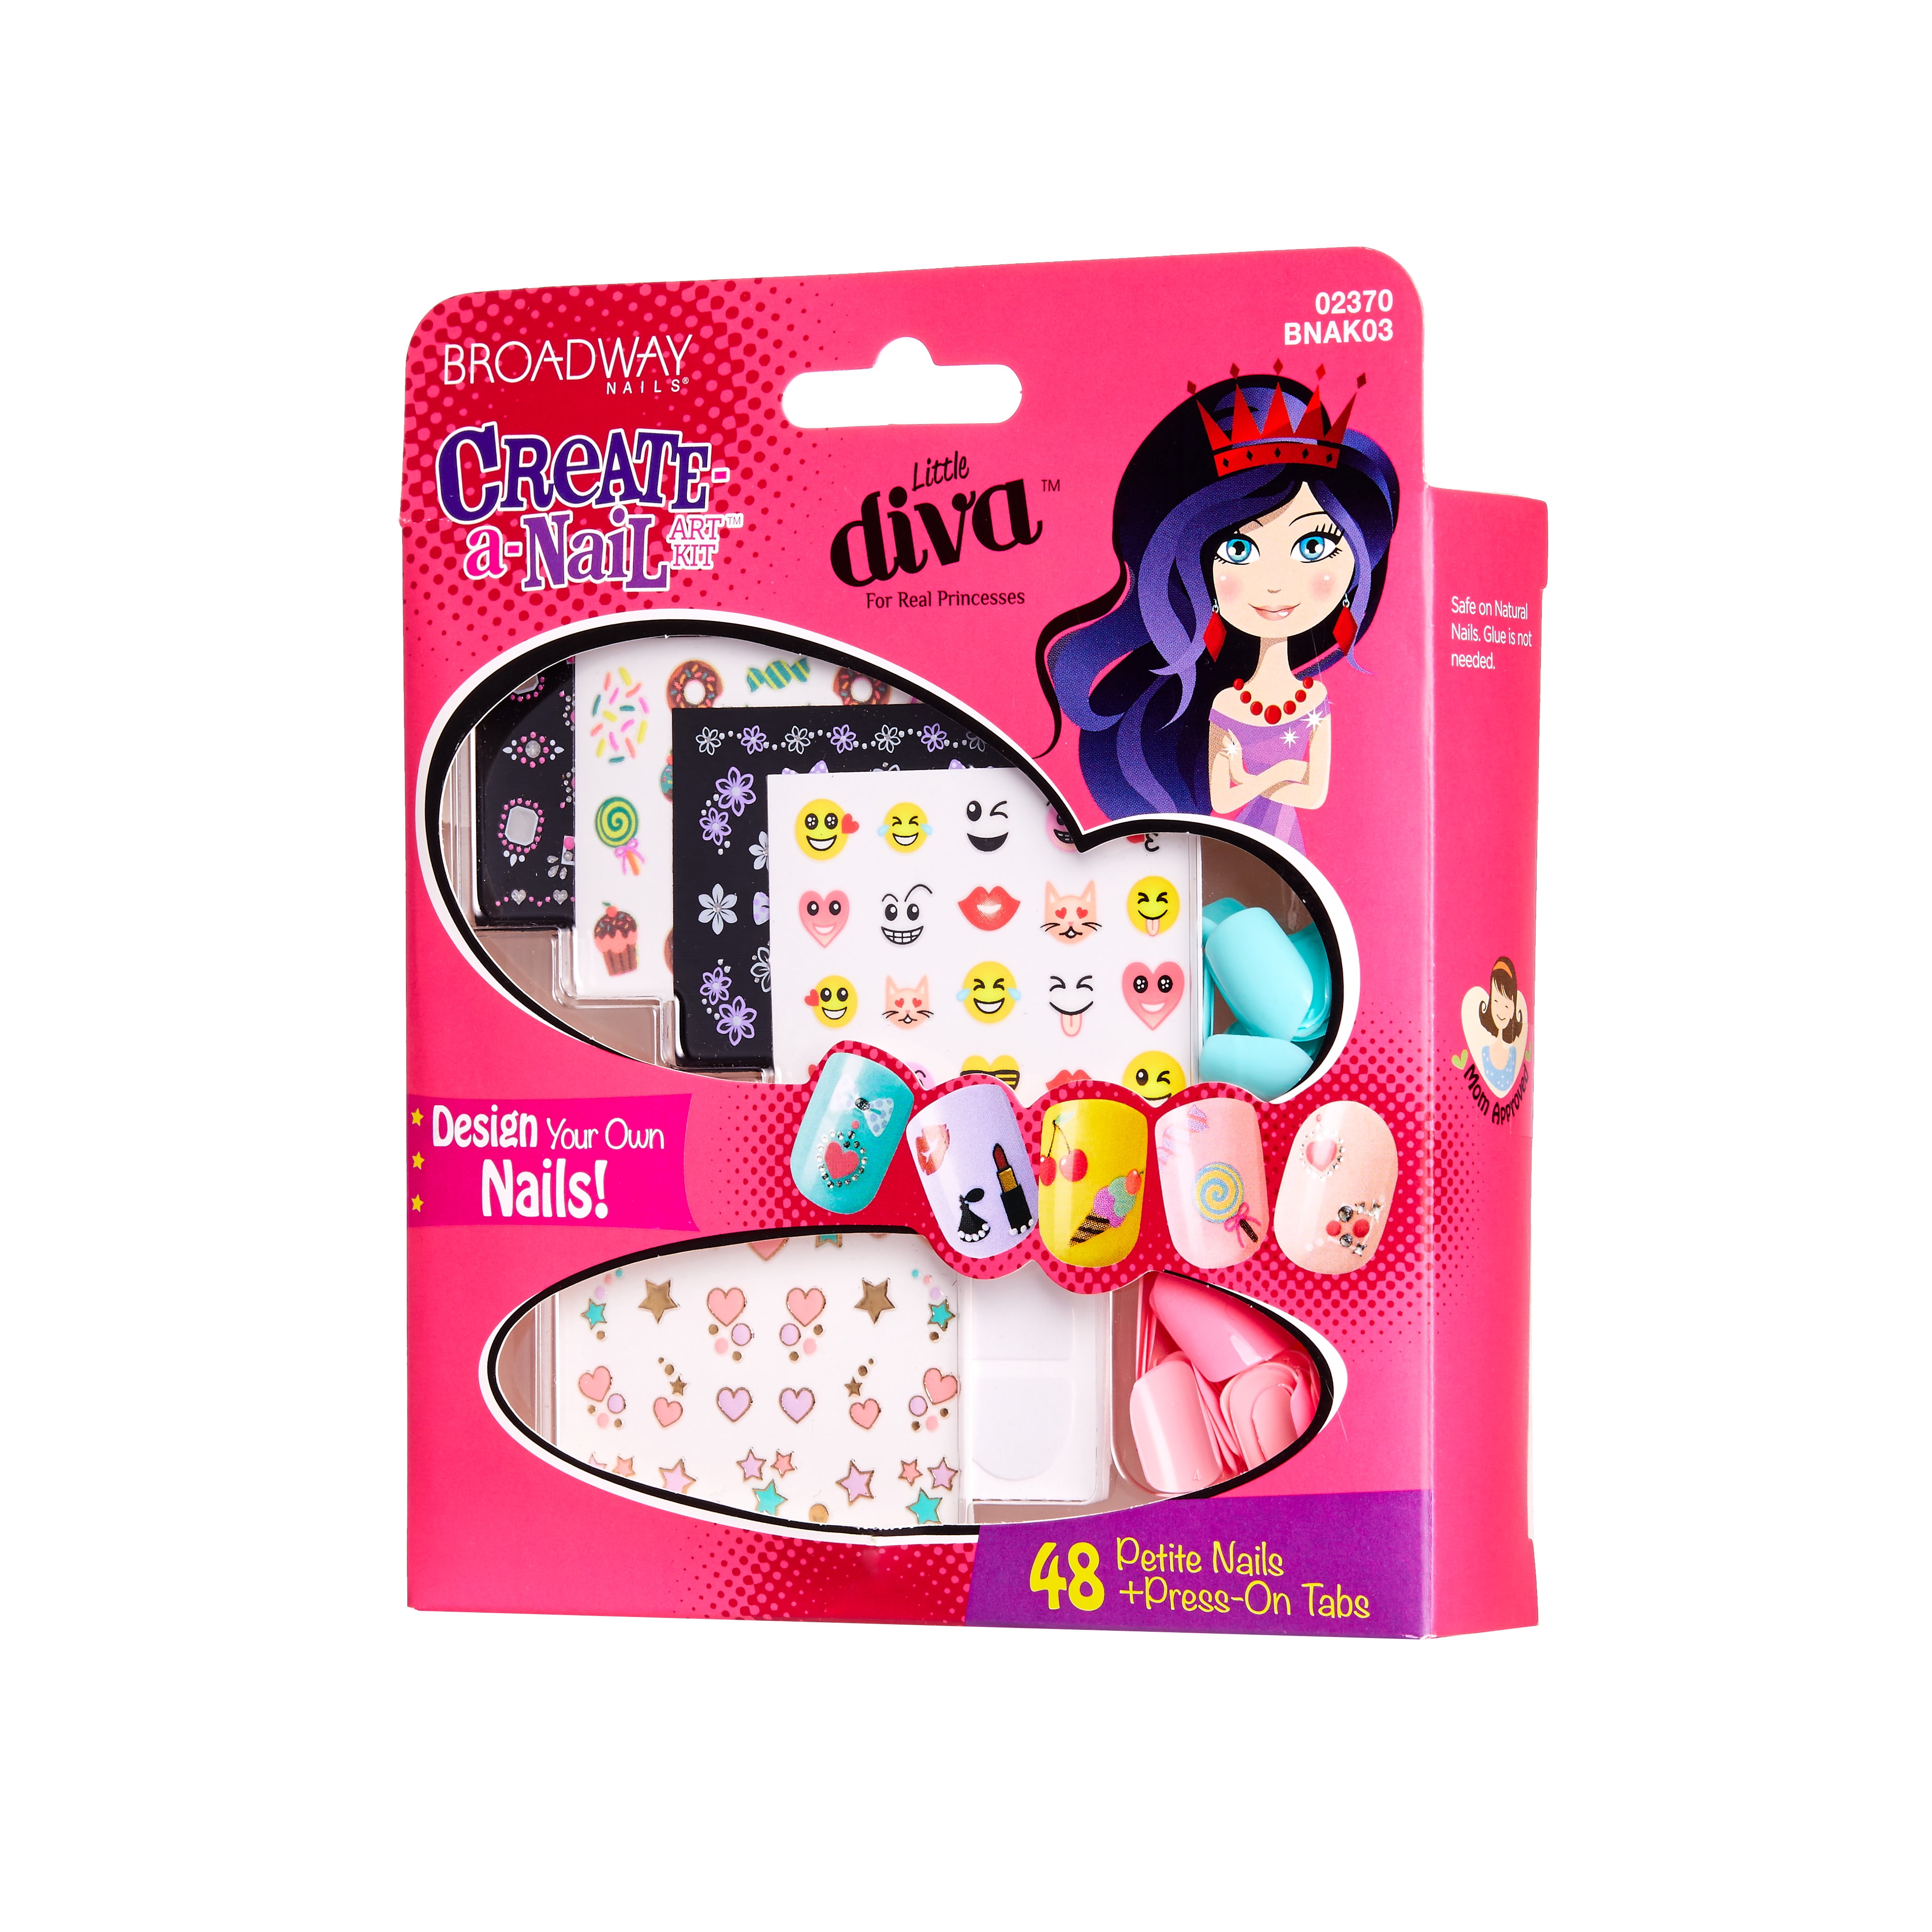 Girls First Nail Art Set 12 Pce in Carry Case Childrens Christmas Toy New 